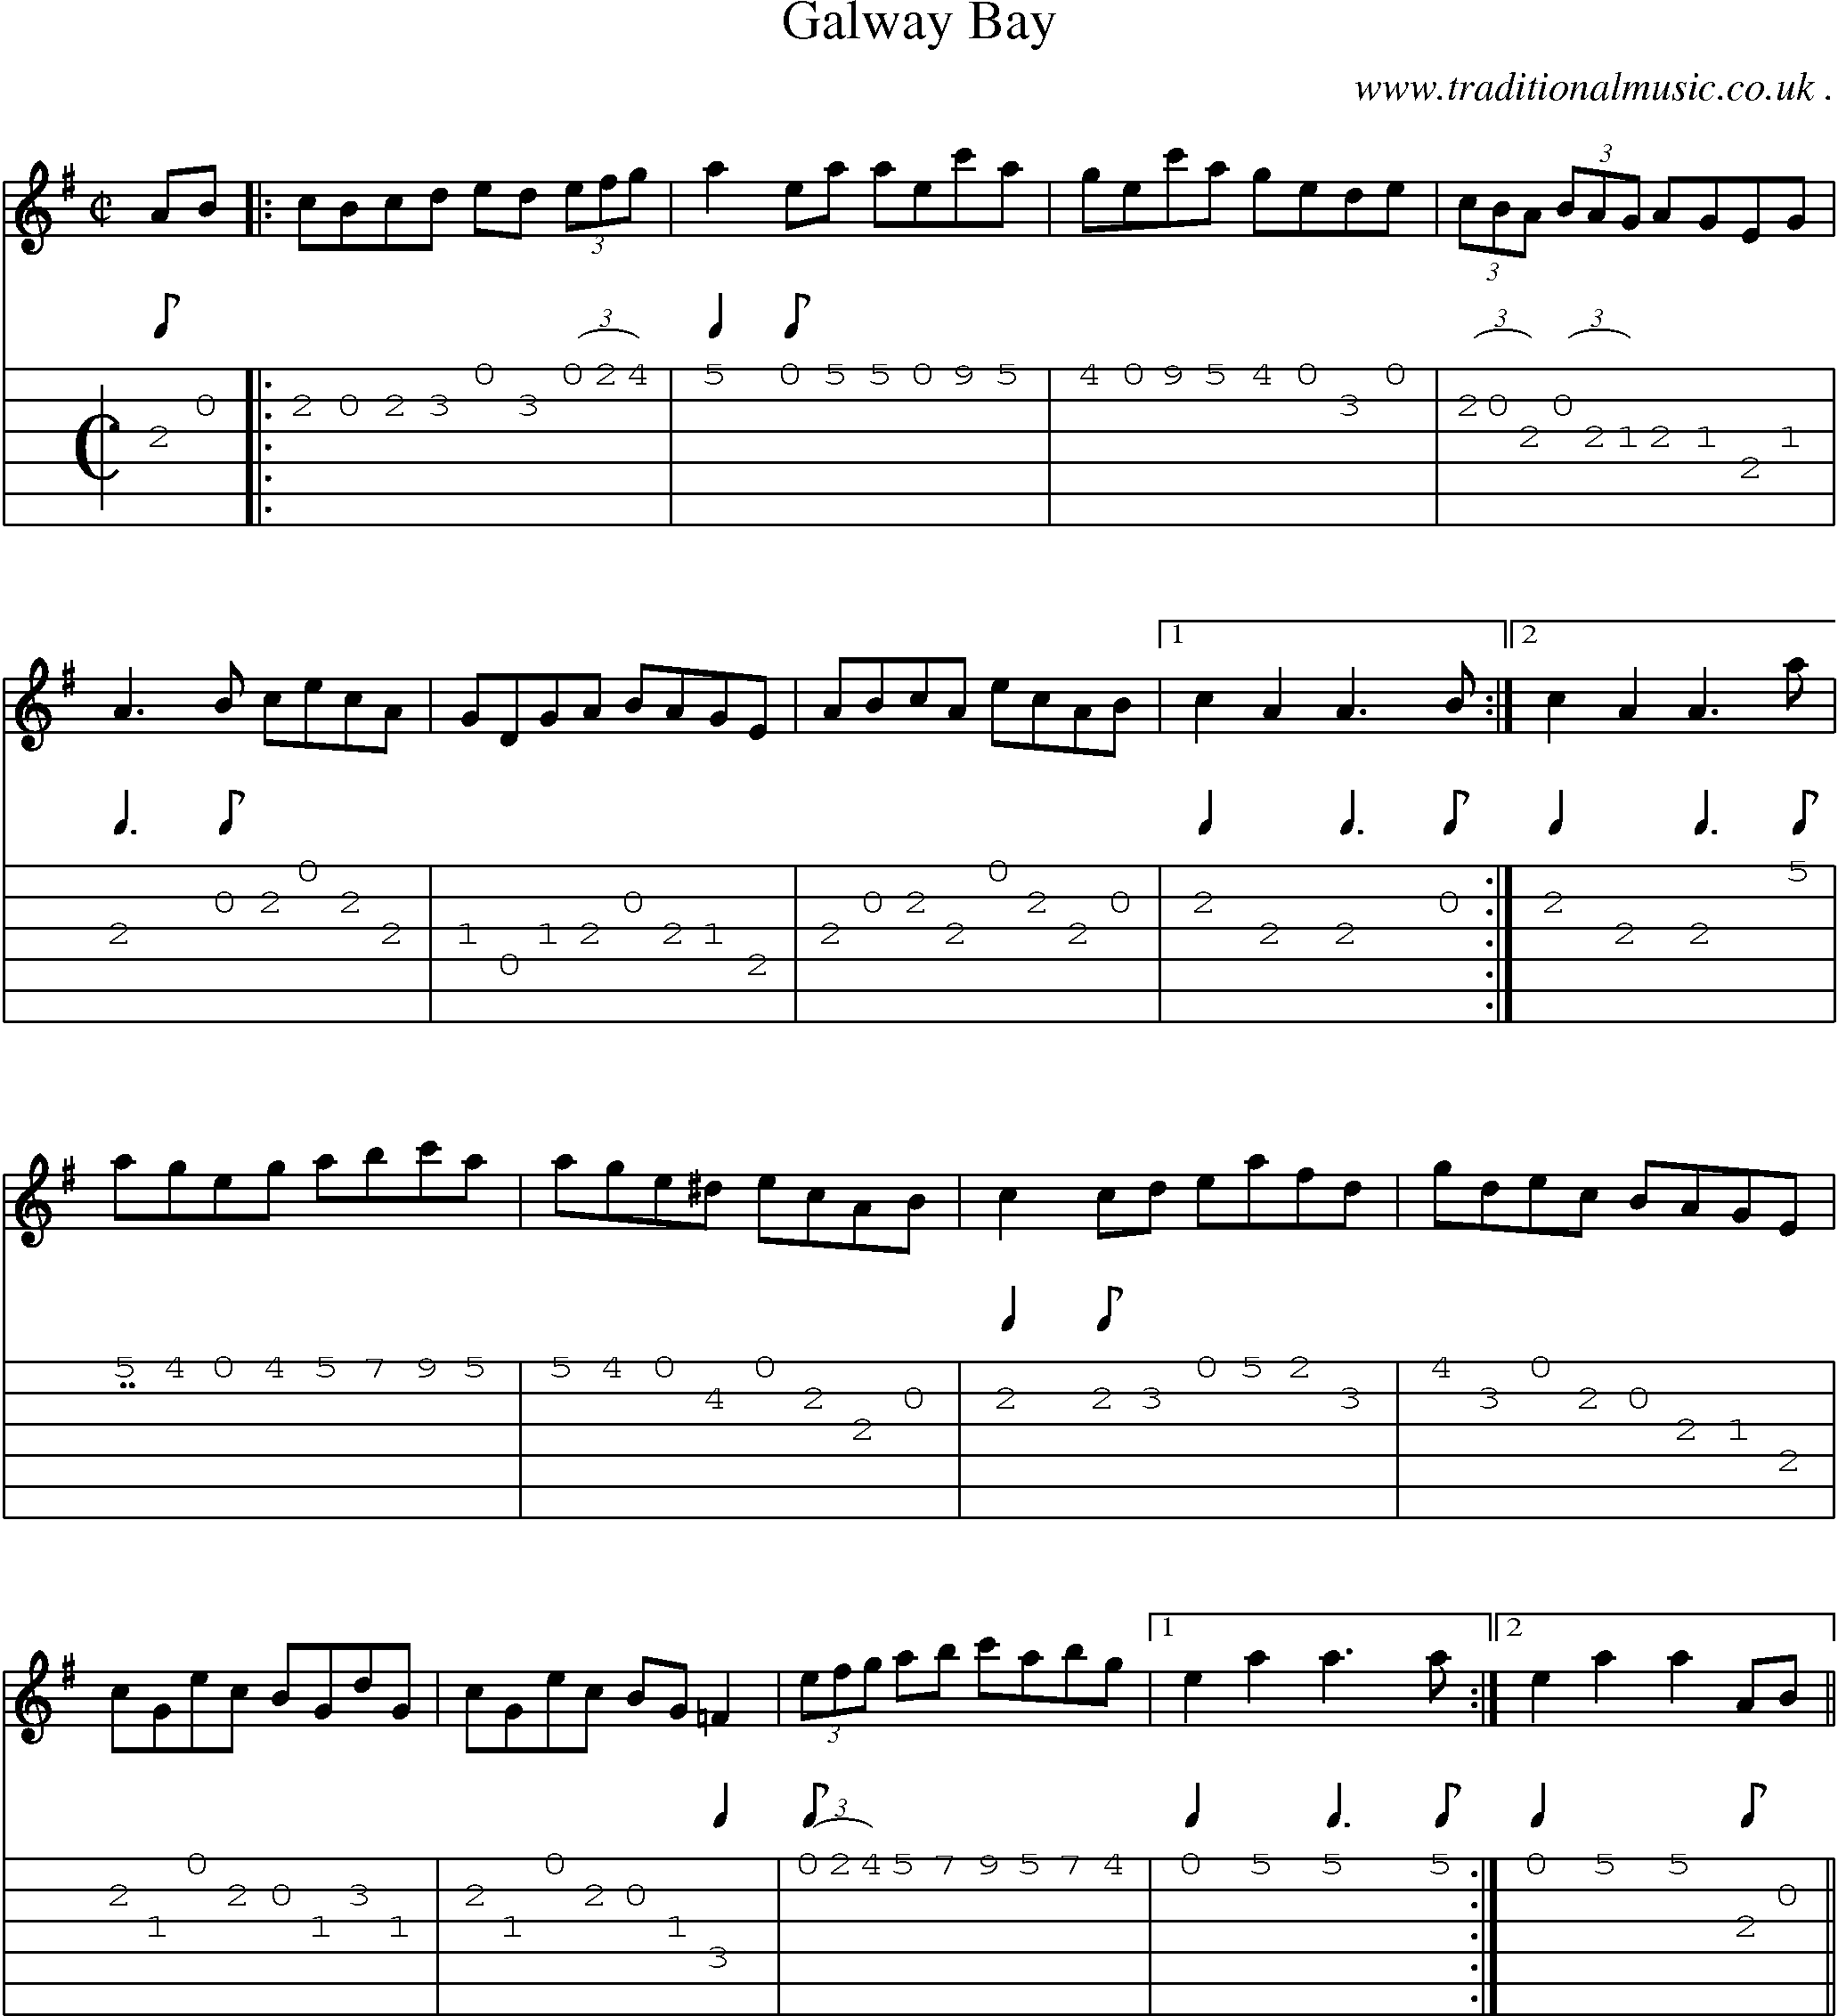 Sheet-Music and Guitar Tabs for Galway Bay